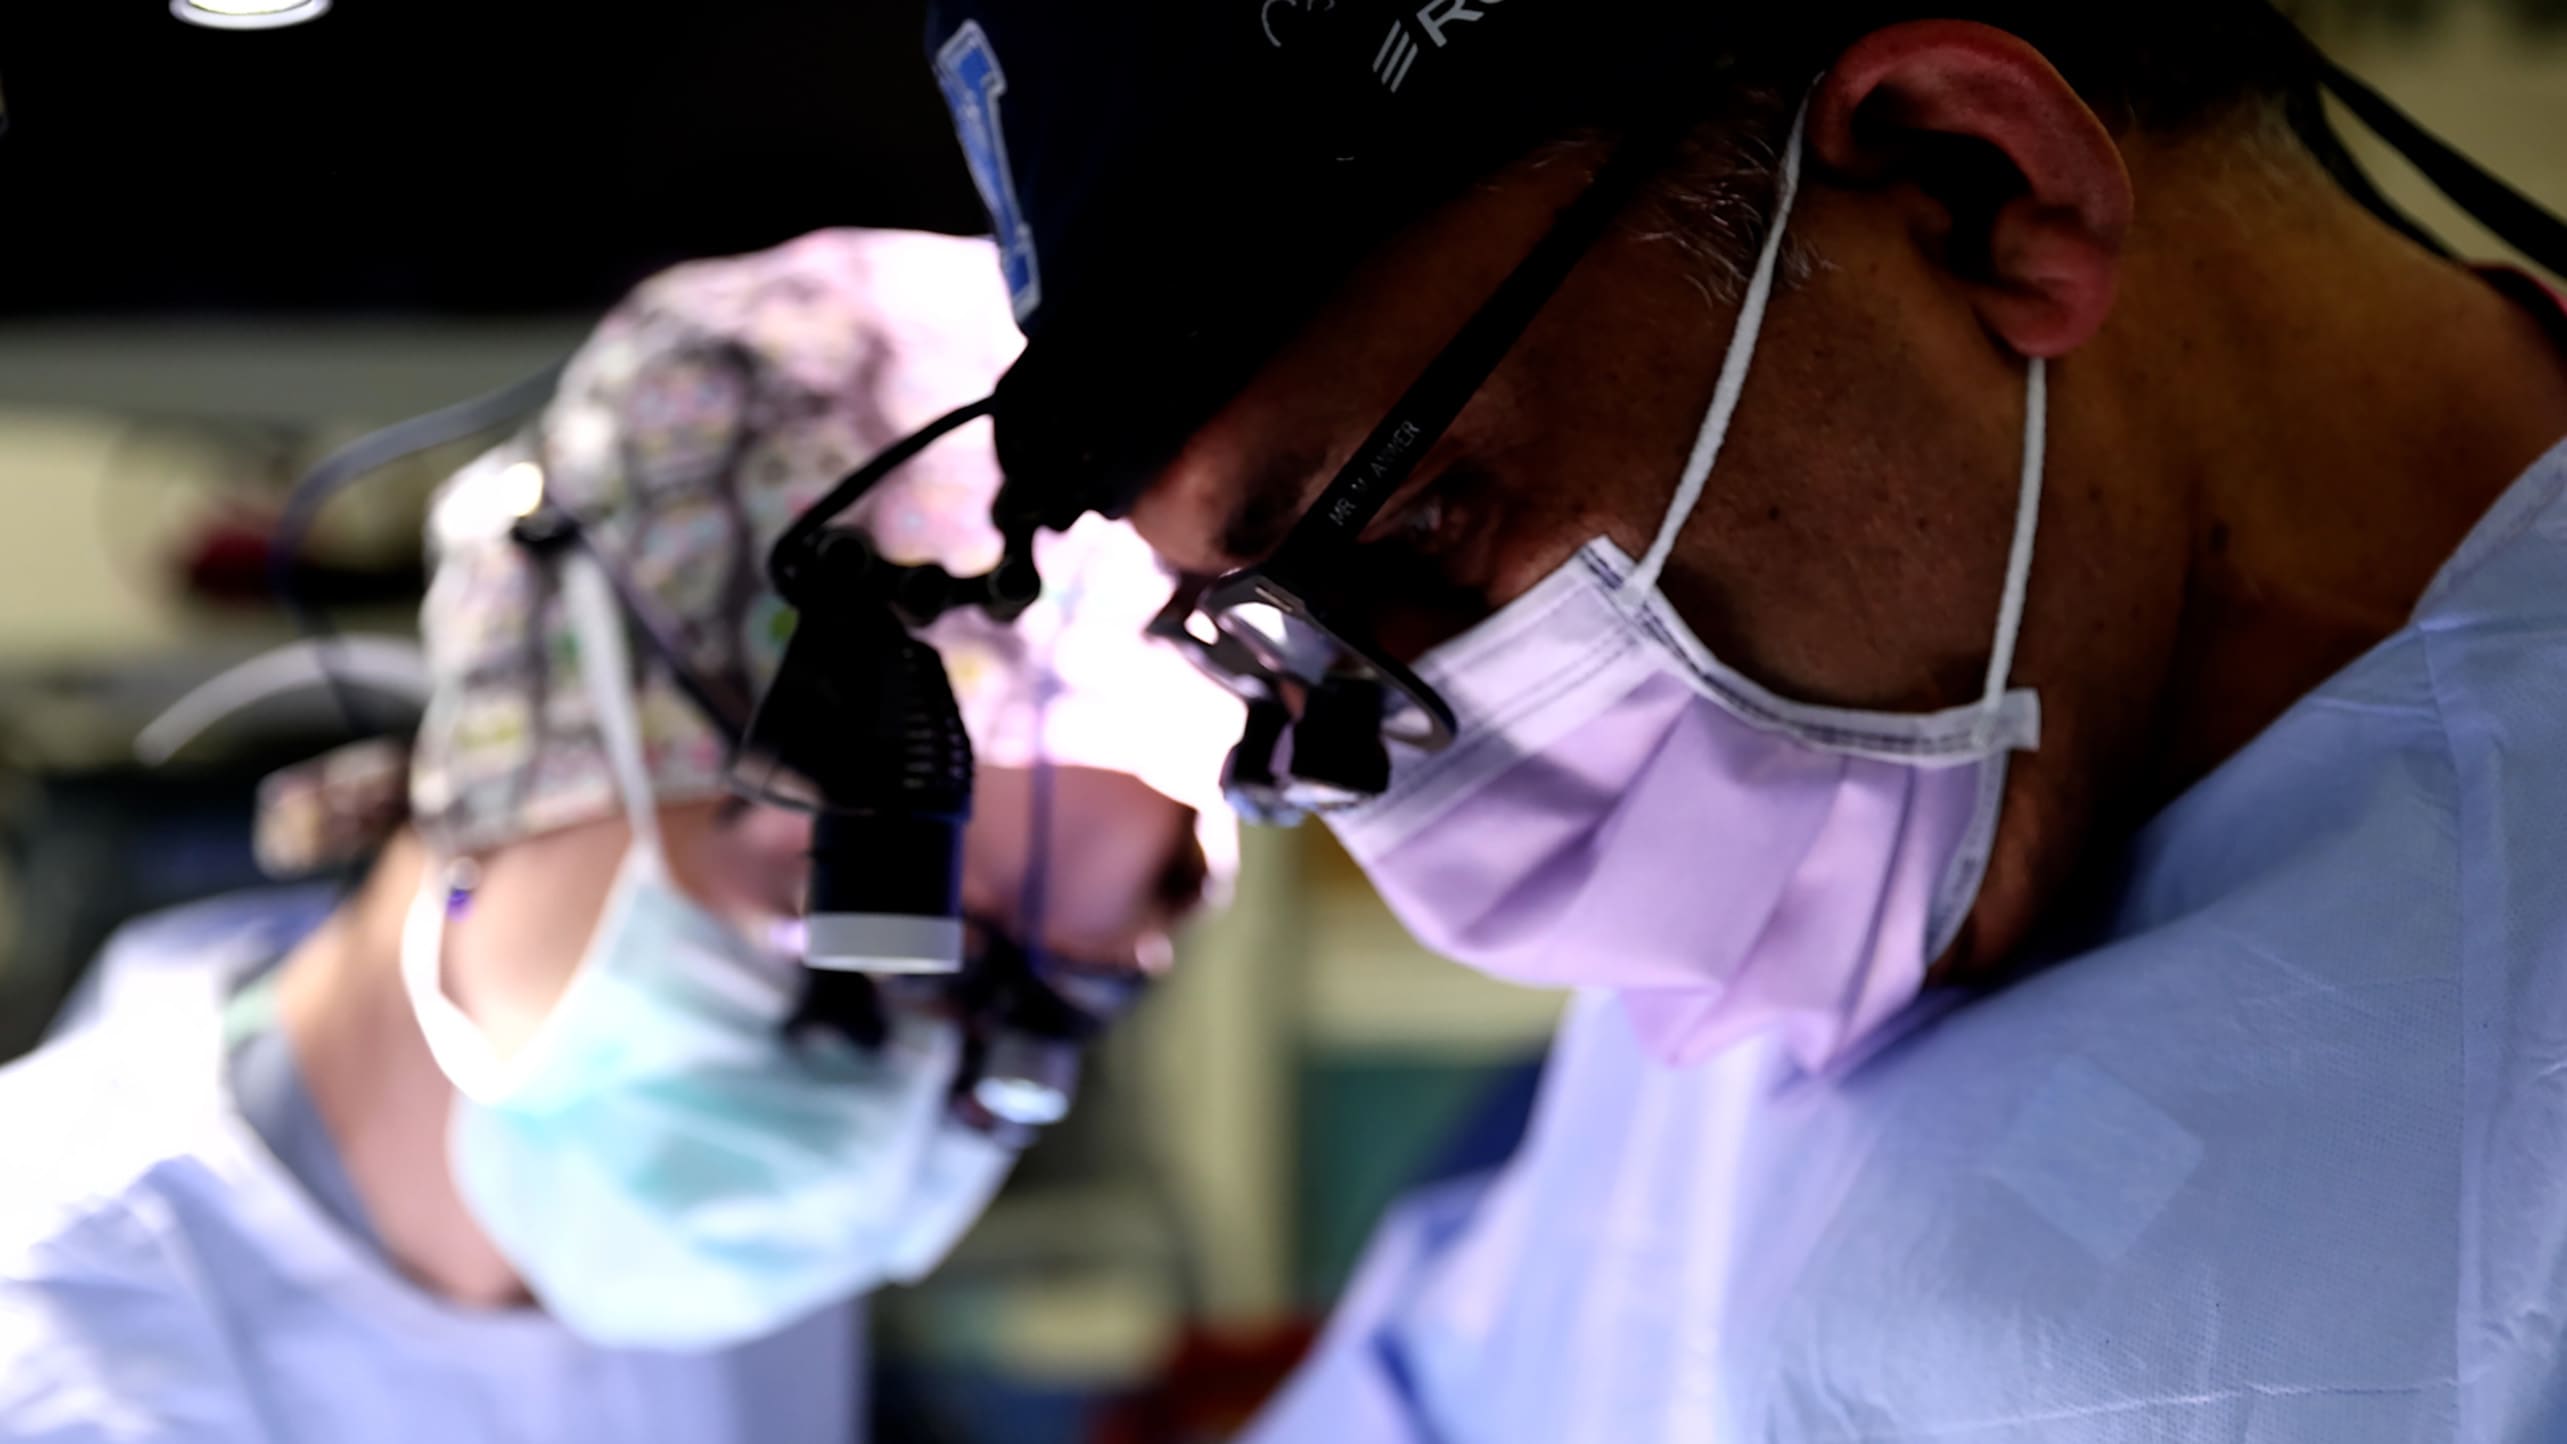 A closeup shot of a heart surgeon wearing surgical mask, scrub cap, and headlight looking down intently